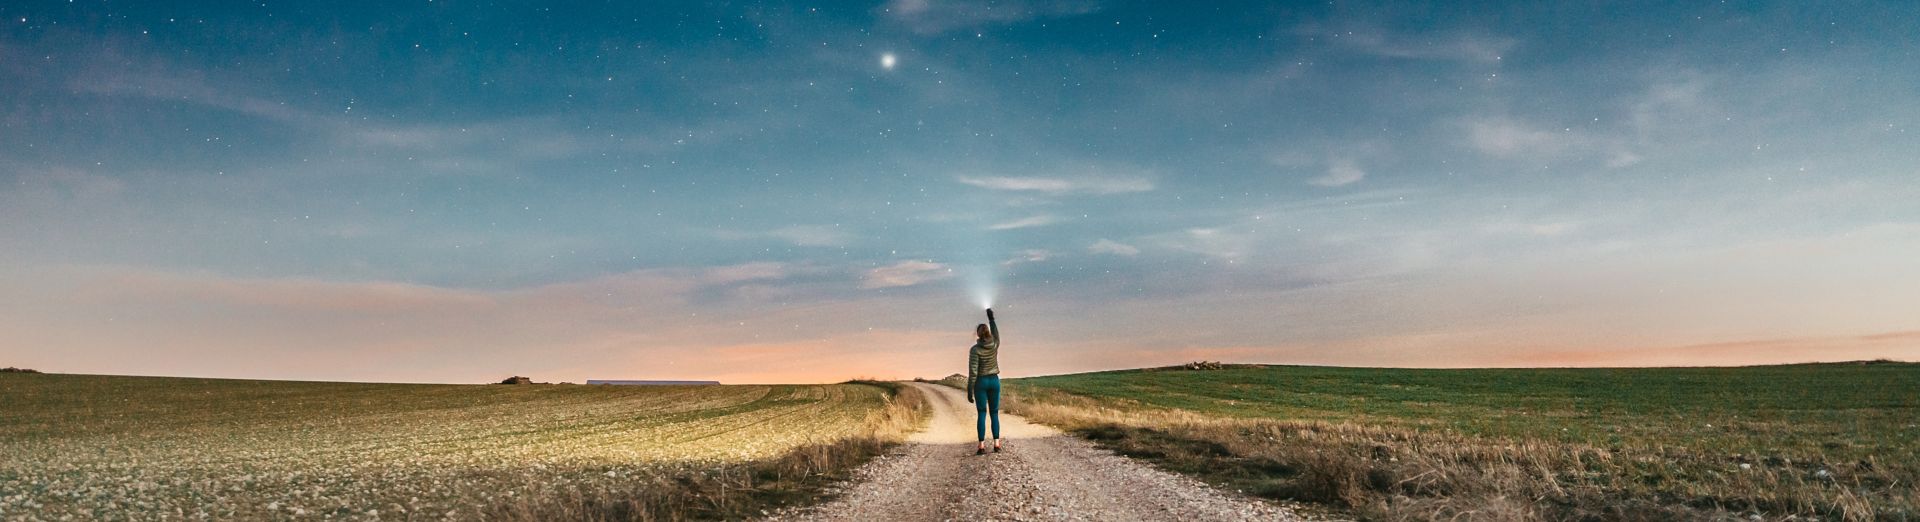 Woman walking down a dirt road at sunset, pointing at the stars with a flashlight